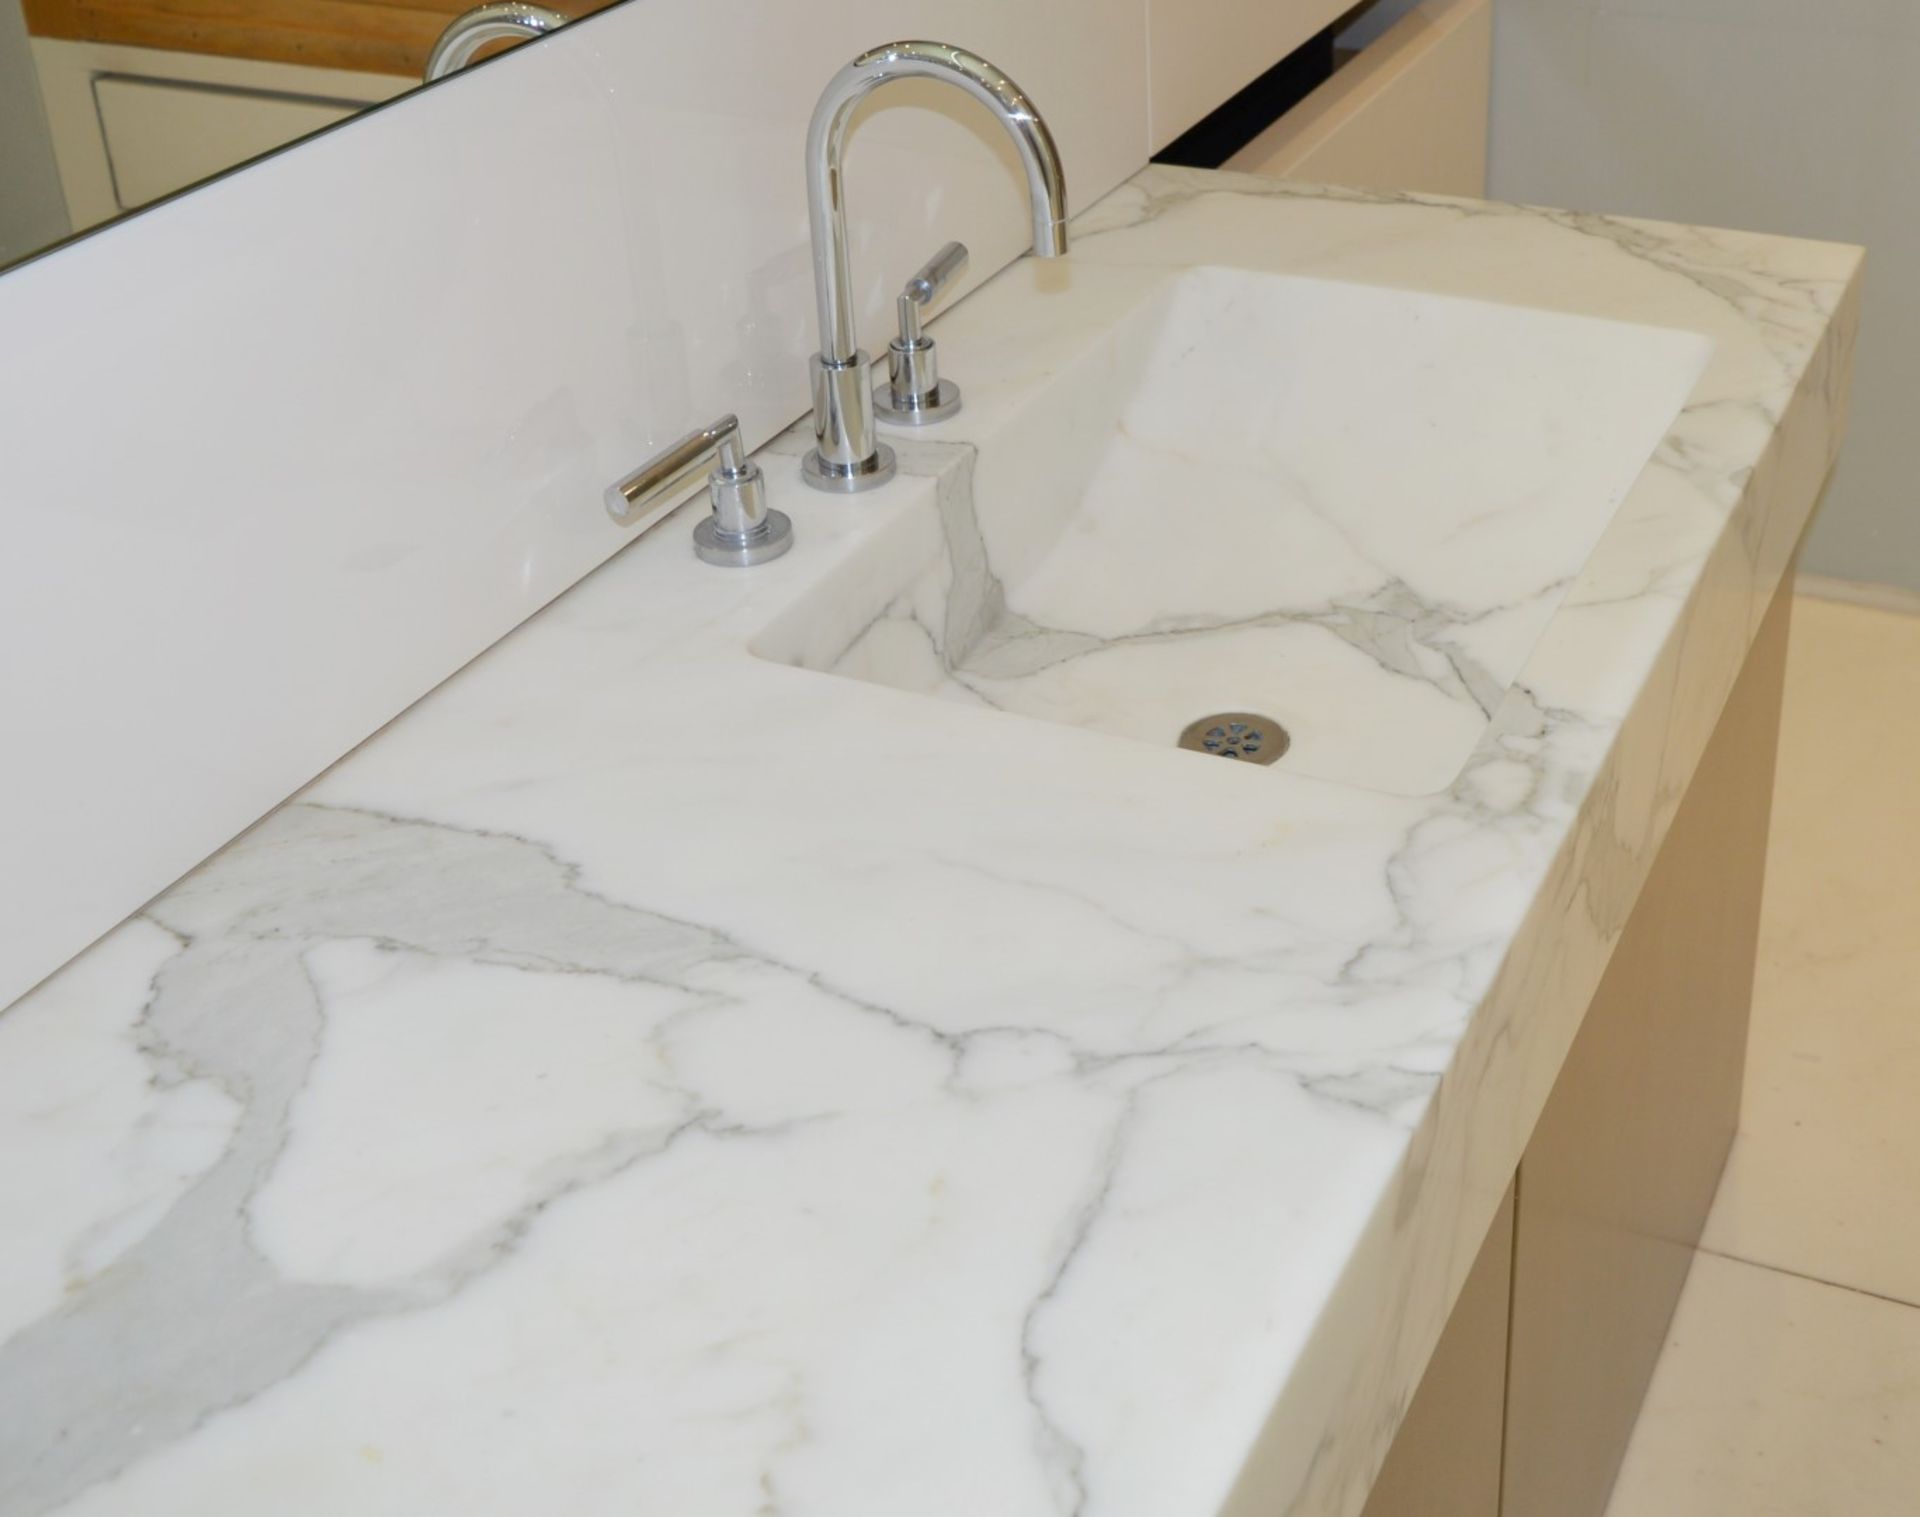 1 x Bespoke His & Hers Marble Bathroom Vanity Unit - Exquisite 7ft Twin Marble Sink Basin With Two - Image 22 of 25